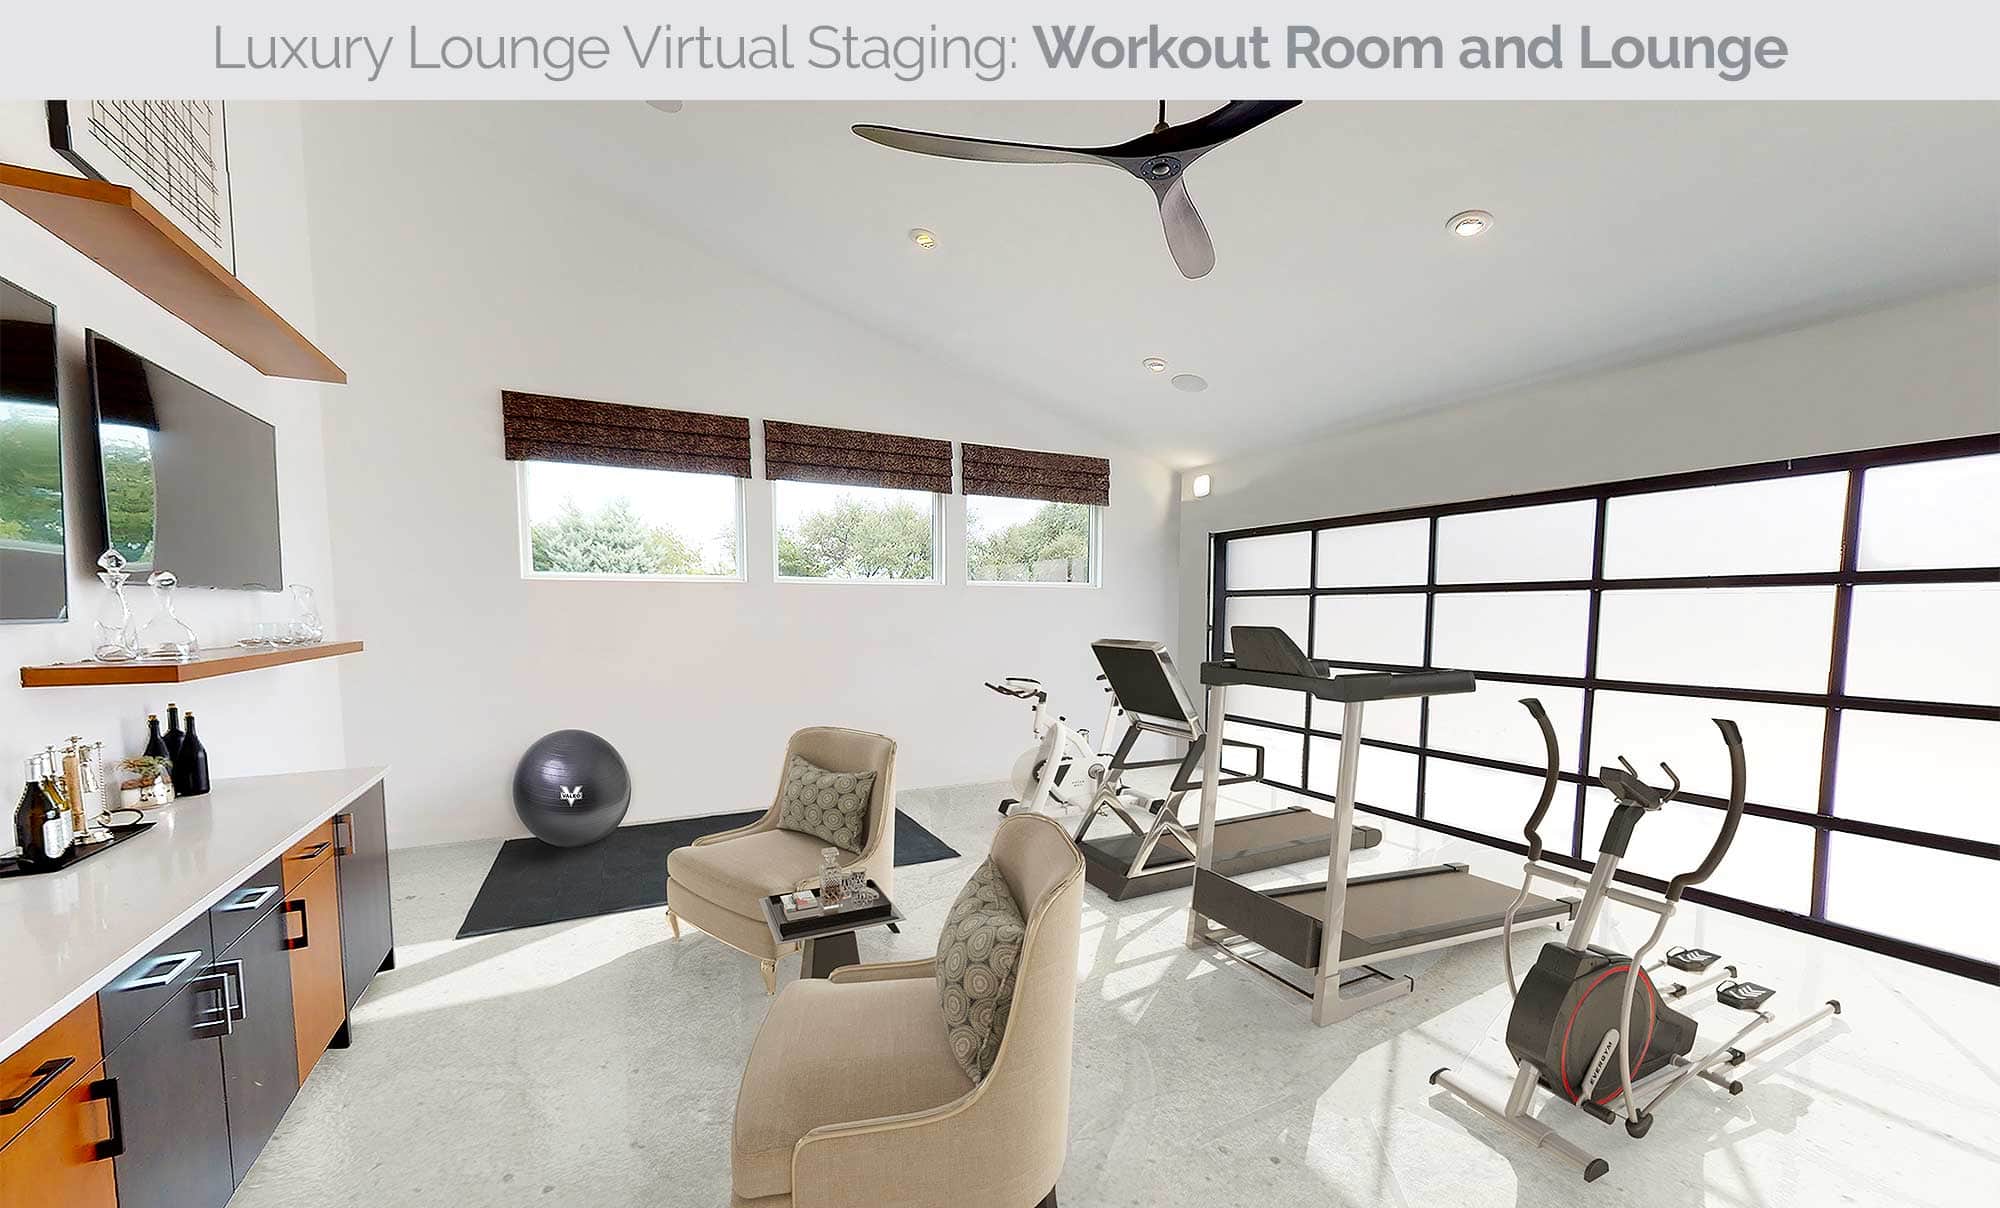 Parade 2020 Luxury Lounge Staging Workout Lounge 2